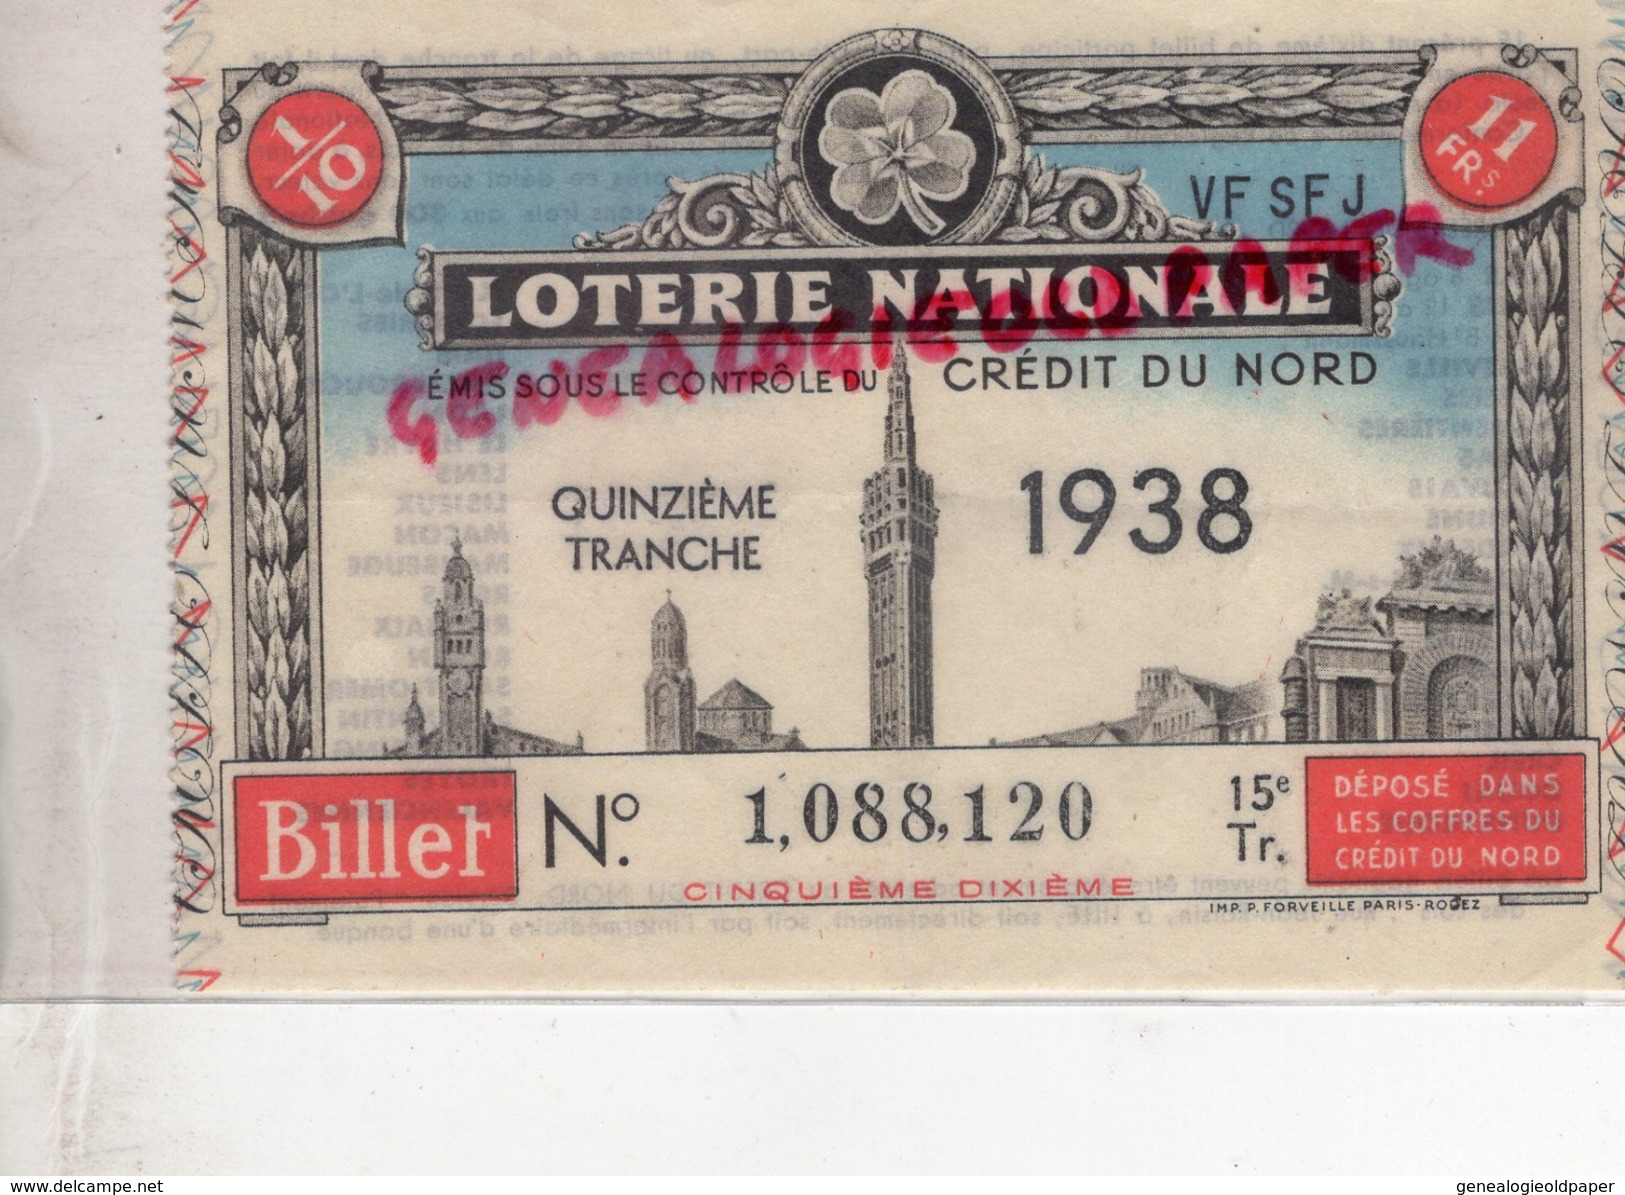 LOTERIE NATIONALE 1938- CREDIT DU NORD - Lottery Tickets